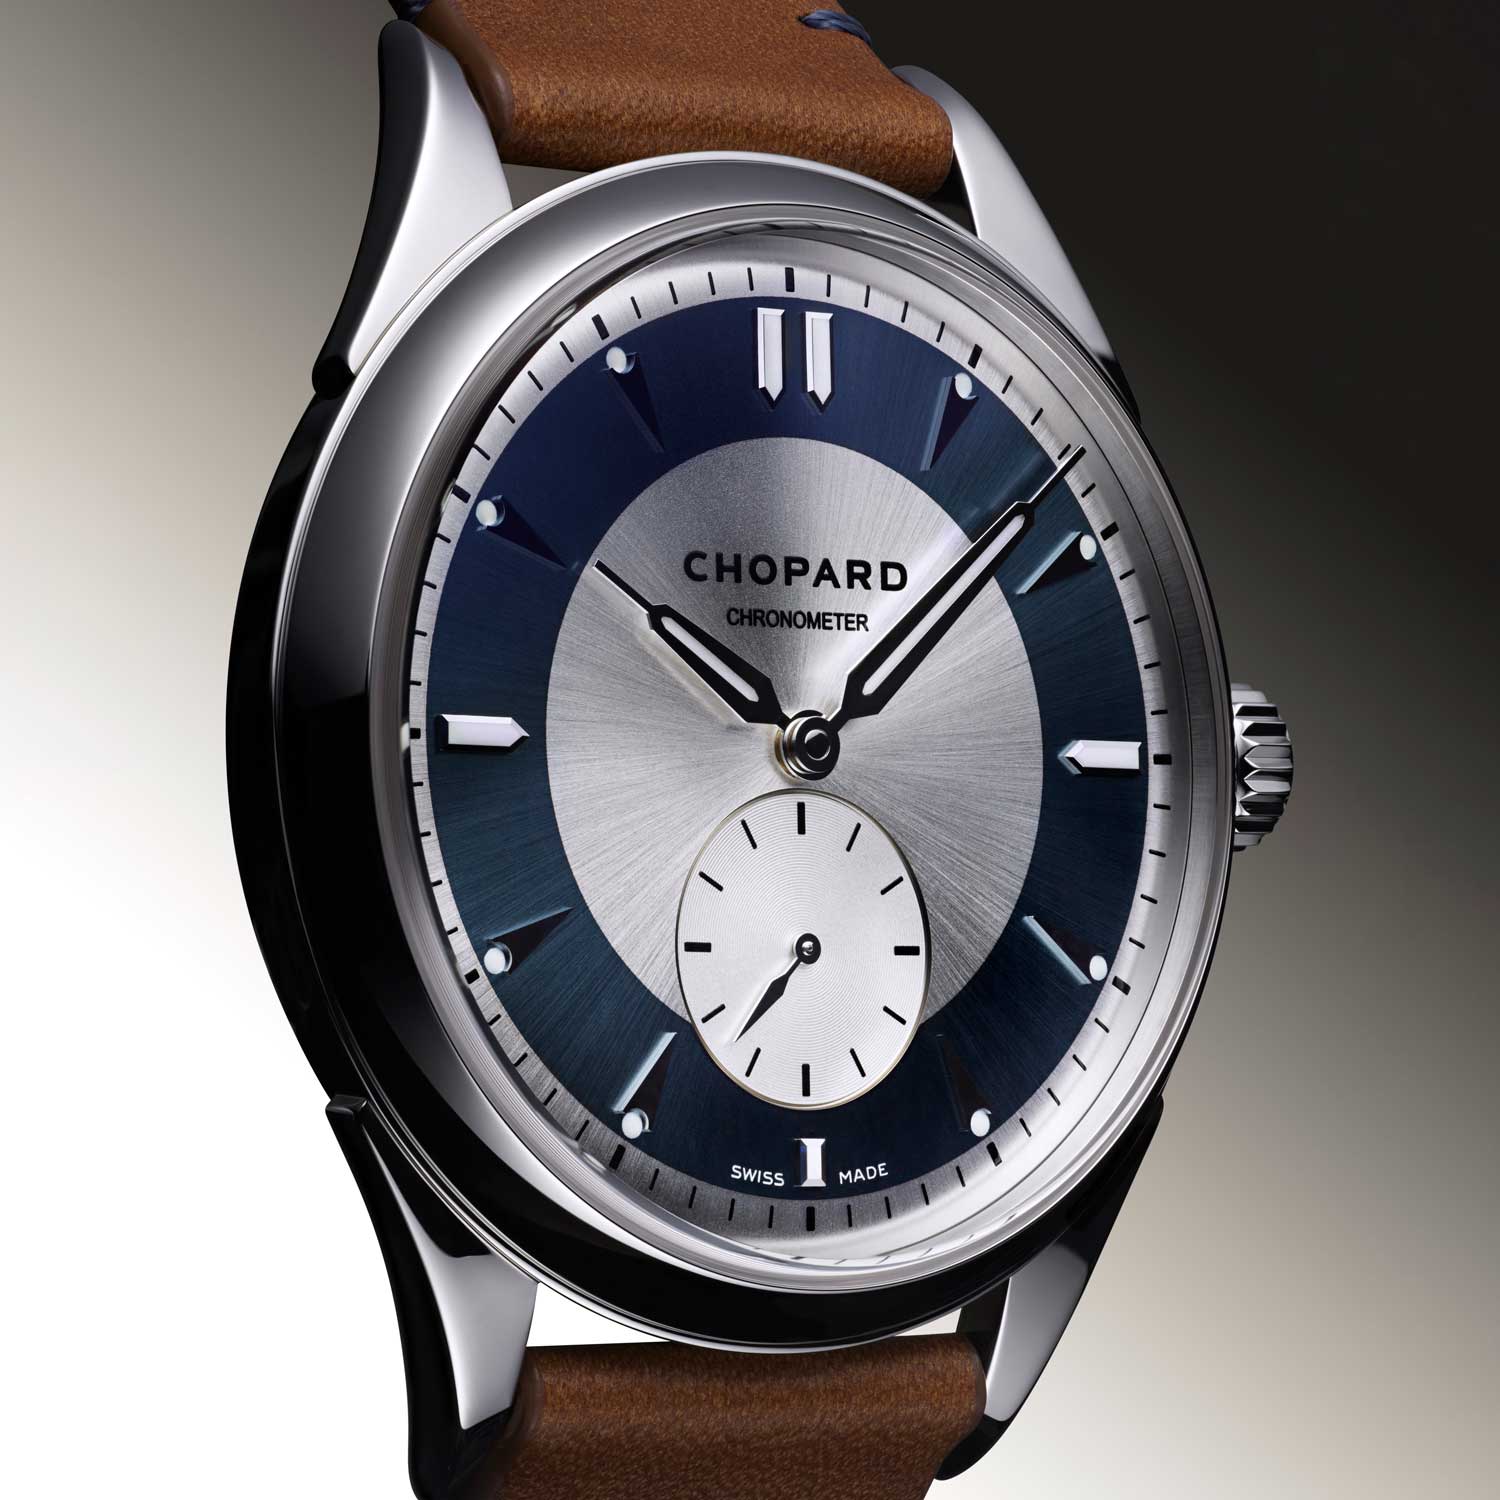 L.U.C QF Jubilee – Ref. 168613-3001: in stainless steel; numbered 25-piece limited edition